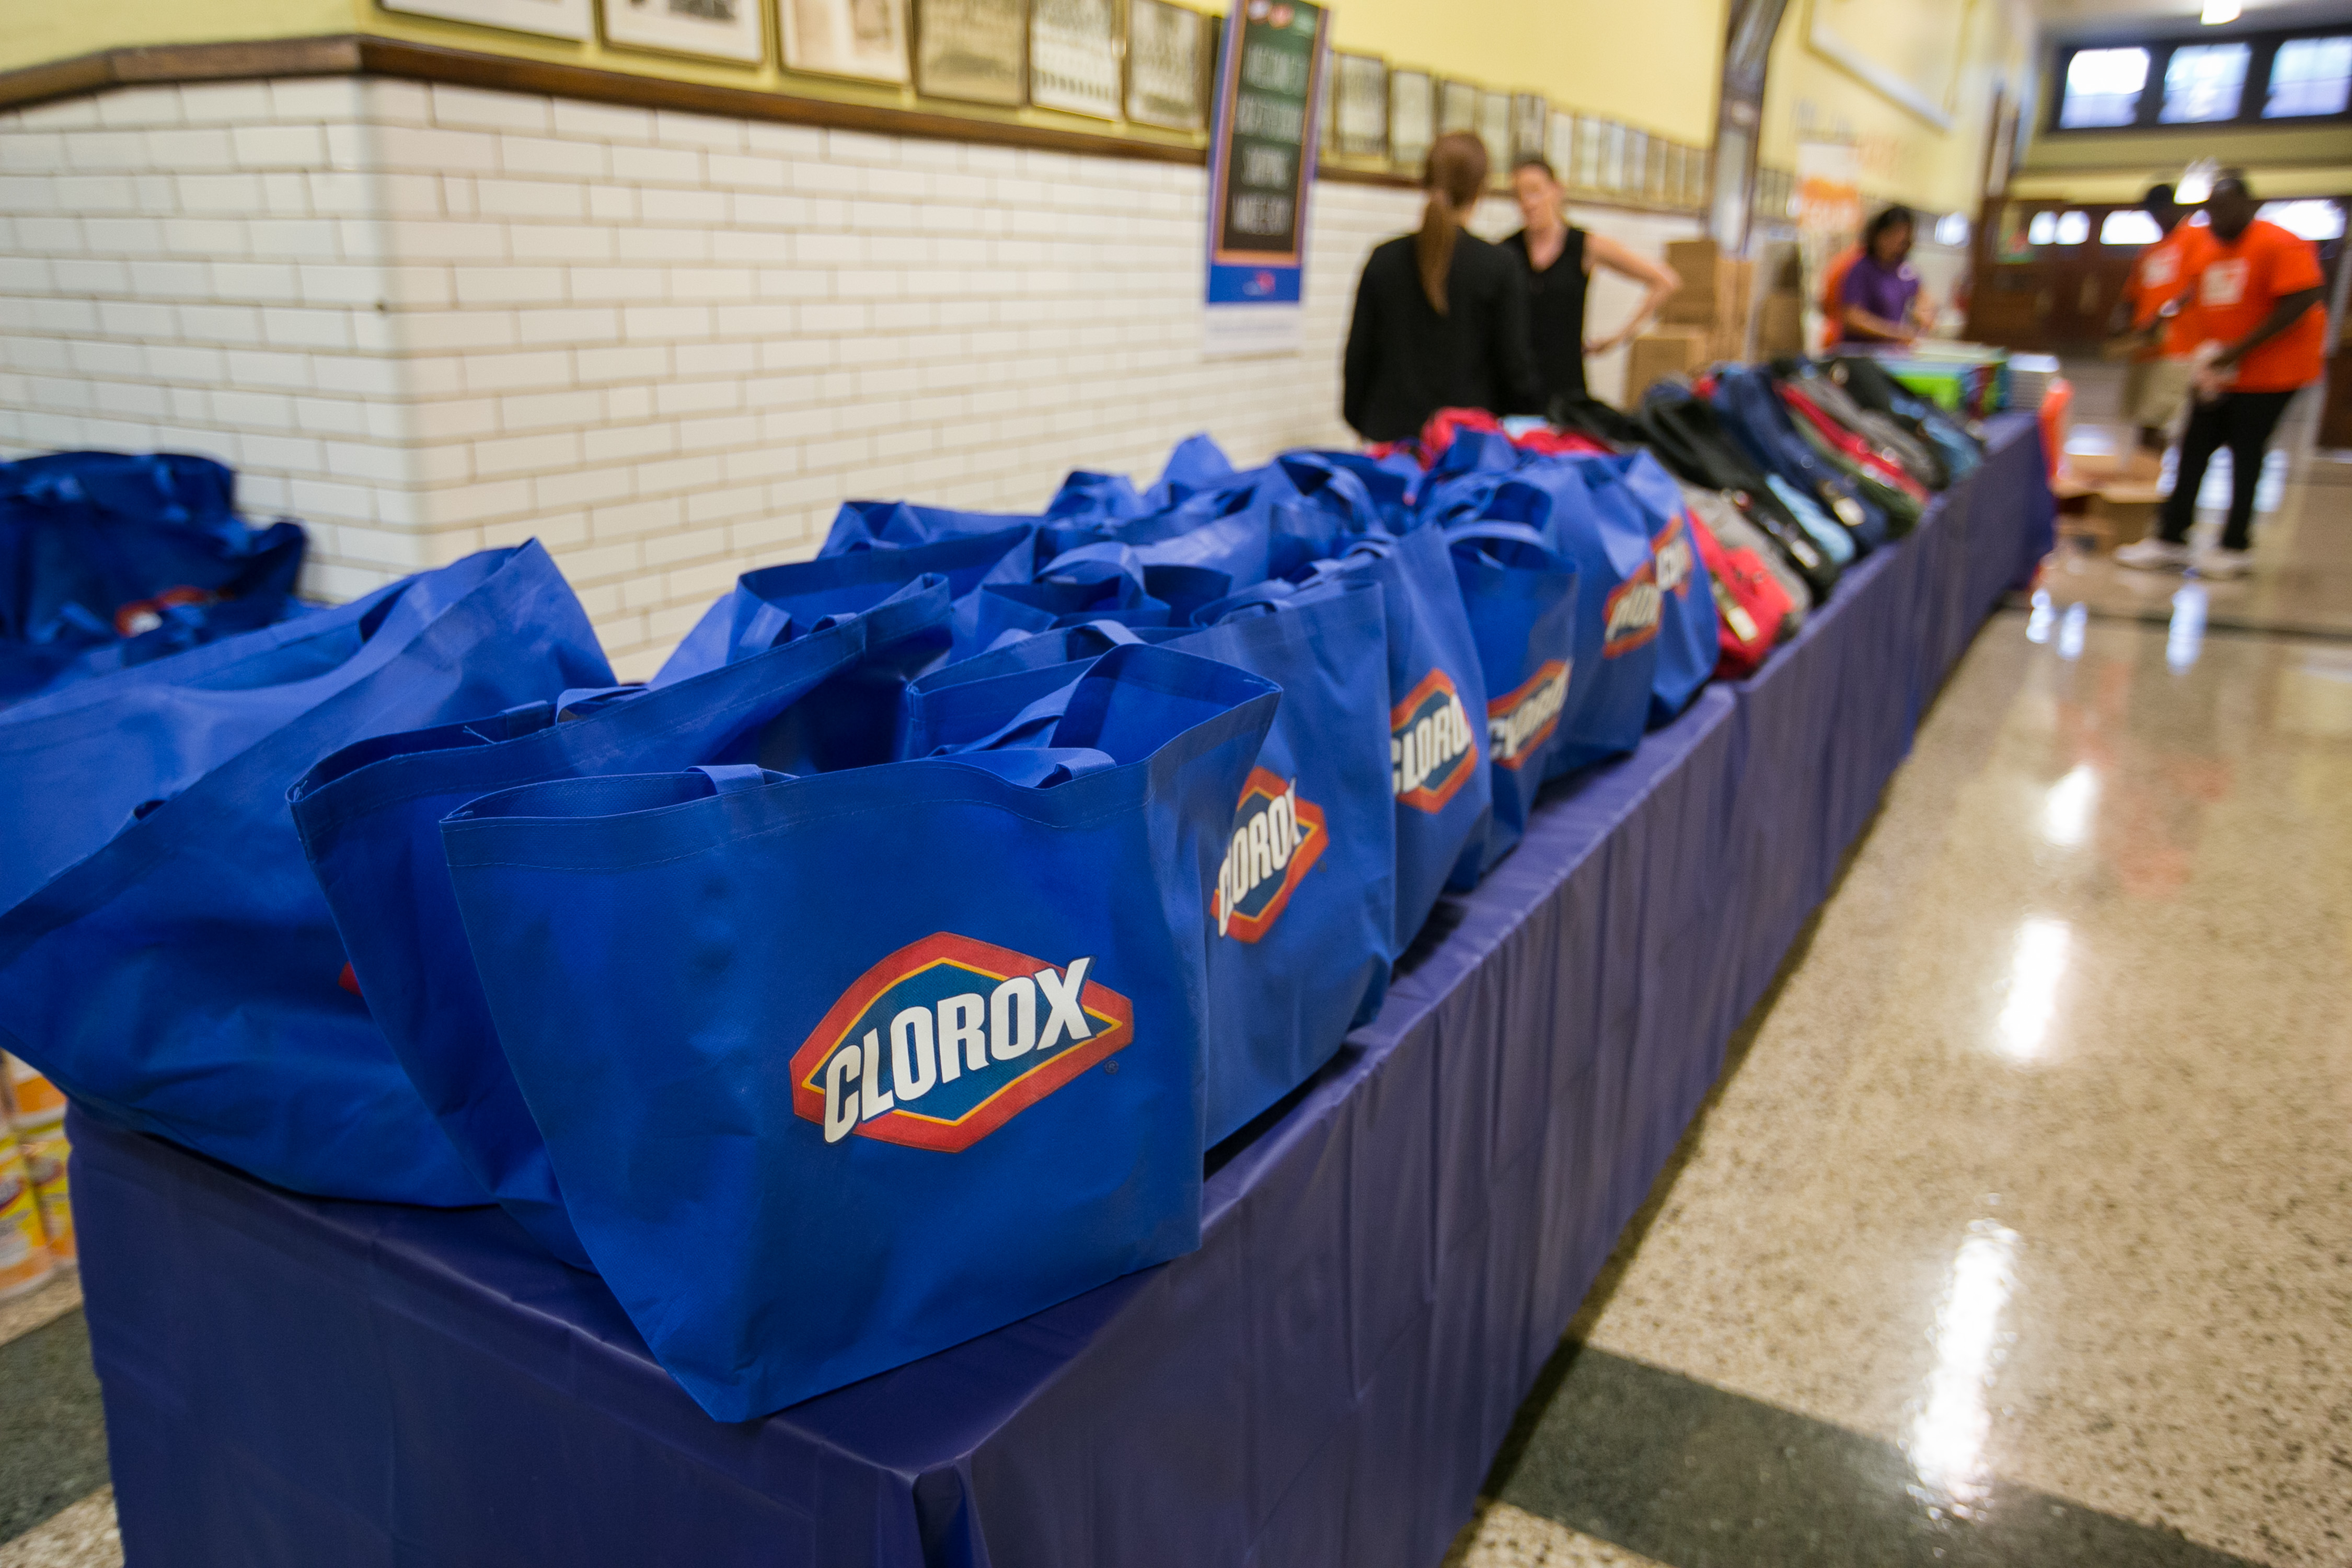 Clorox® simplifies the back-to-school shopping experience for students and teachers through a free school supply pop-up shop at Douglas Taylor School in Chicago, Sept. 7, 2016. (Peter Wynn Thompson/AP Images for Clorox)